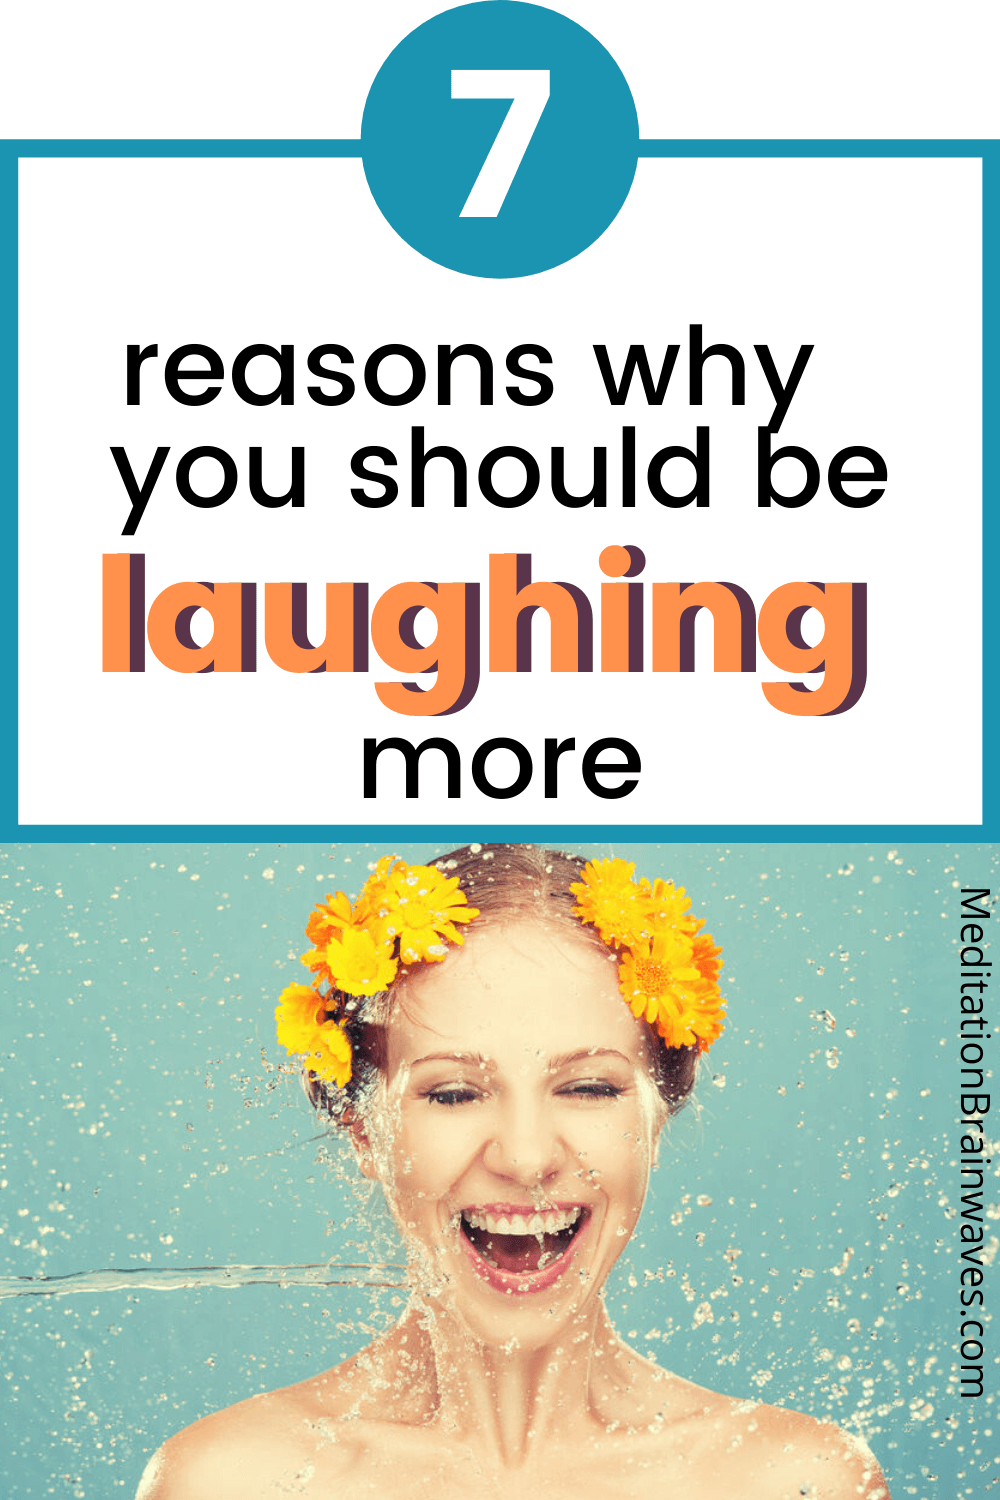 7 reasons why you should be laughing more